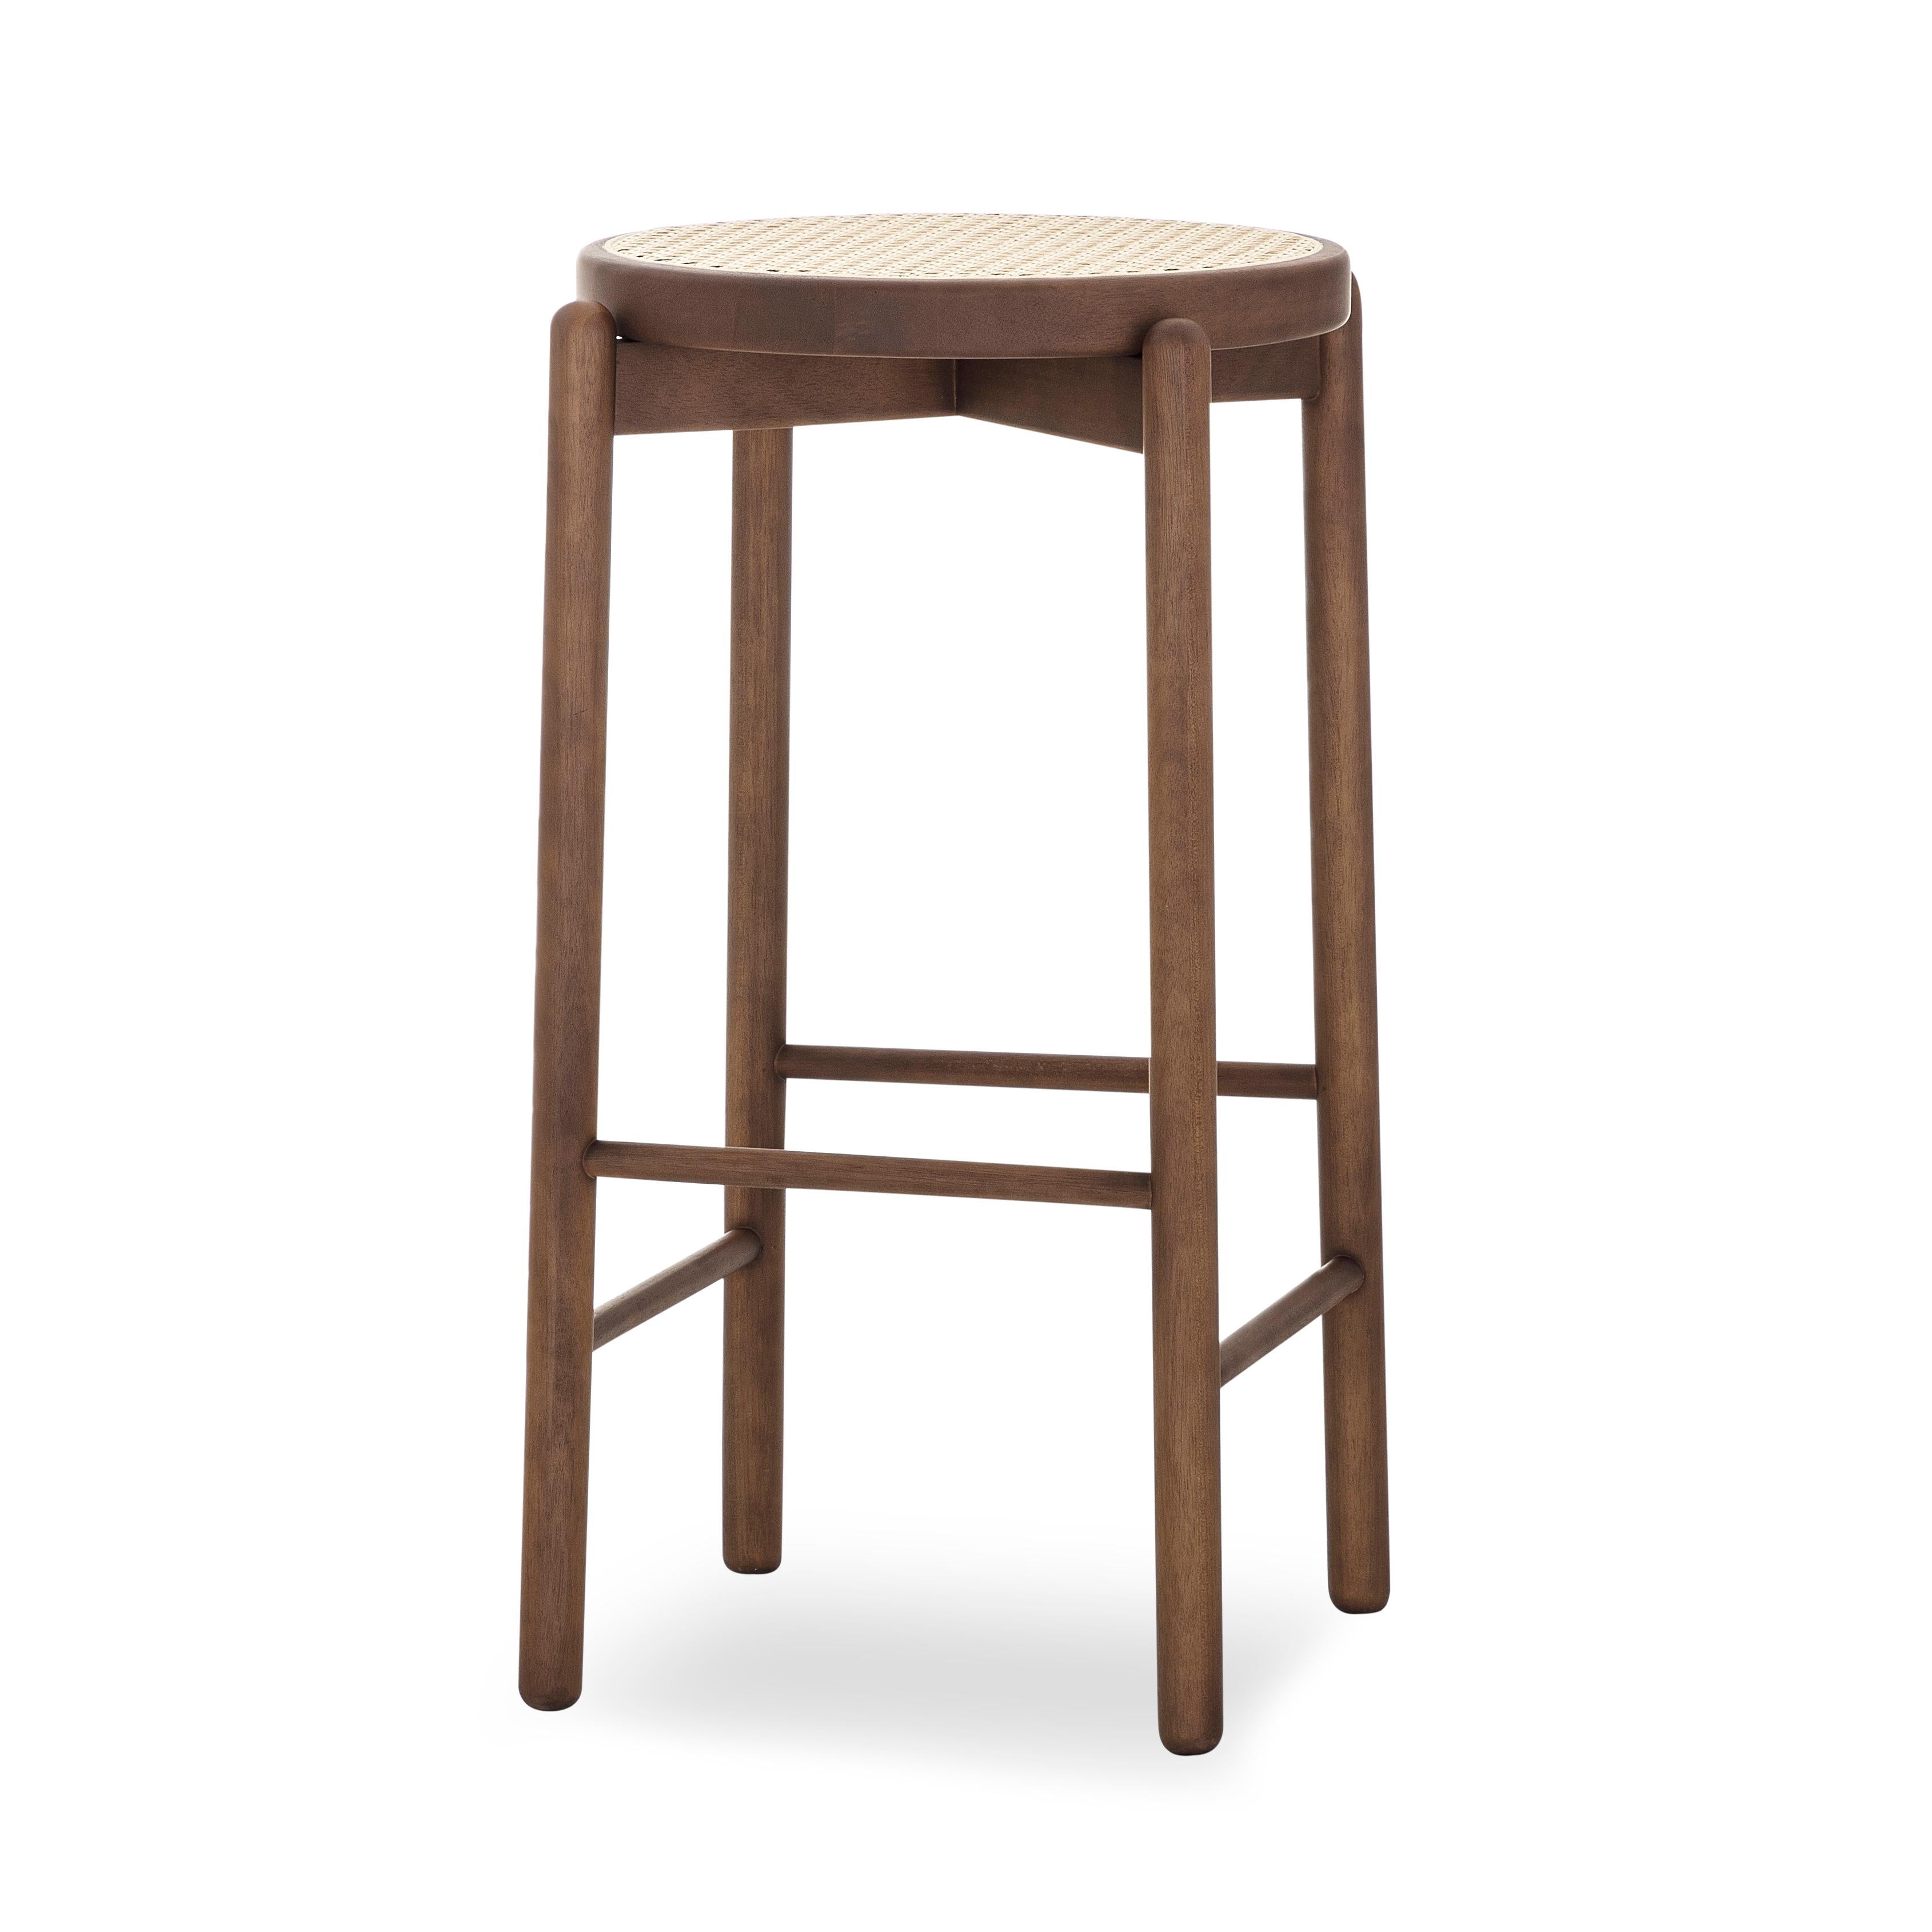 Our Uultis team has designed this Maru counter stool in a walnut wood base with a cane seat that it will stop being only a decoration counter stool to become part of the day-to-day lives of those who experience enriching cultural activities. The